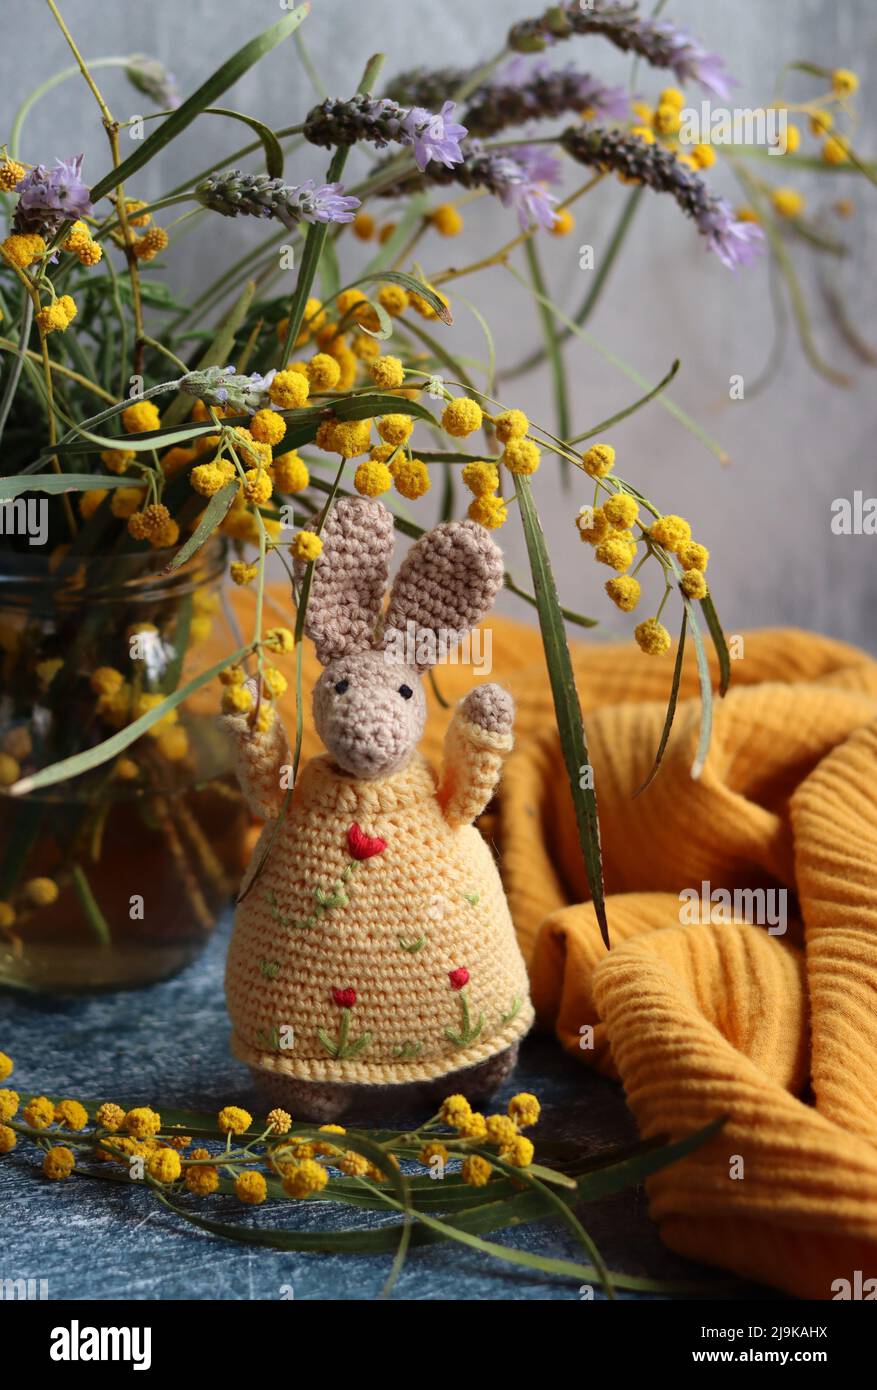 Handmade toys close up. Crochet plant and bunny on grey background. Still life with spring flowers and cute toys. Easter gift ideas. Stock Photo